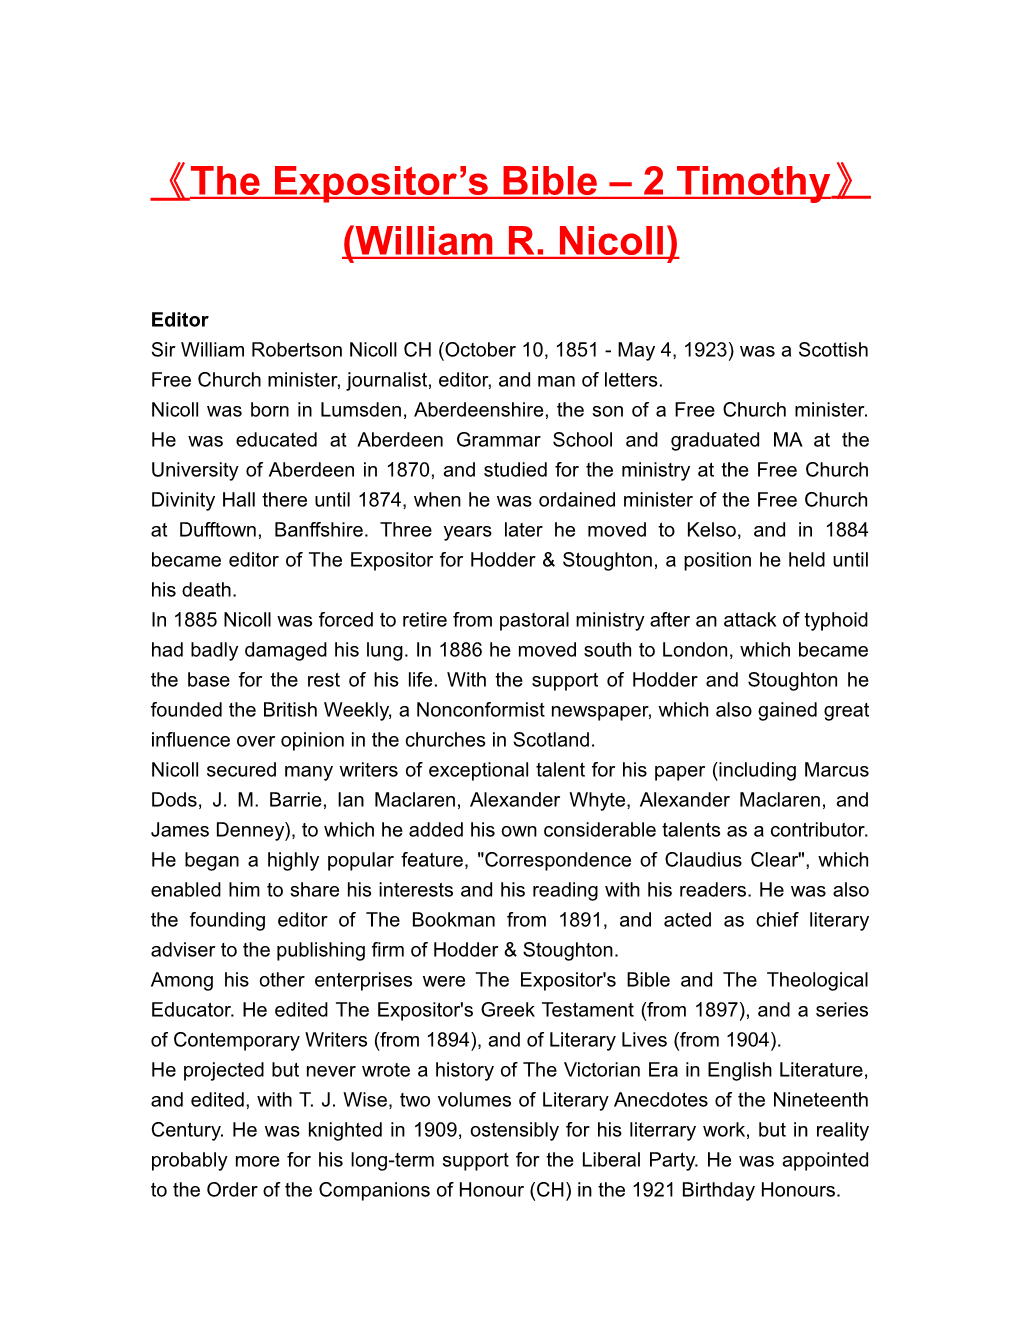 The Expositor S Bible 2 Timothy (William R. Nicoll)